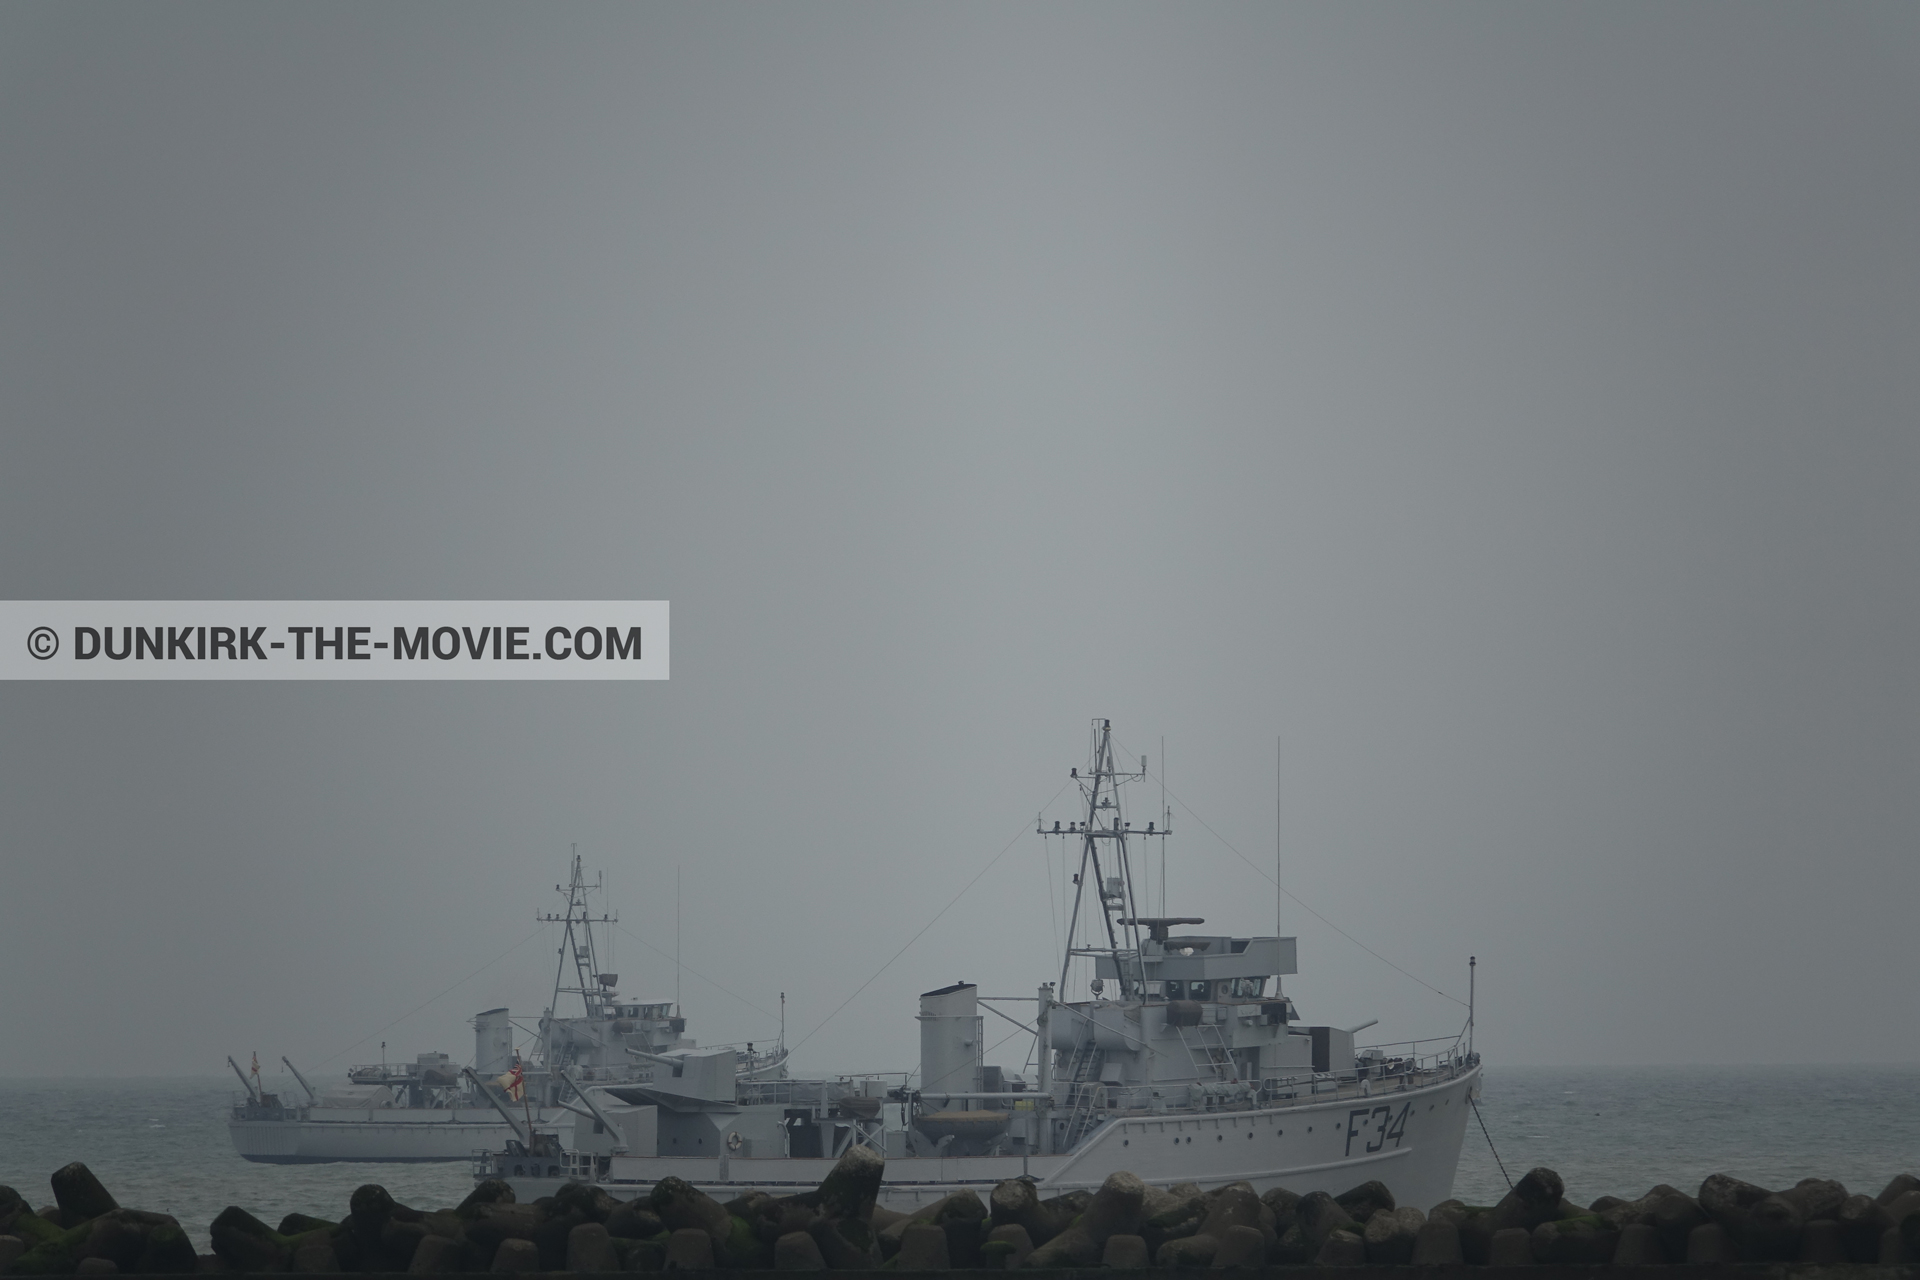 Picture with boat, grey sky, F34 - Hr.Ms. Sittard,  from behind the scene of the Dunkirk movie by Nolan